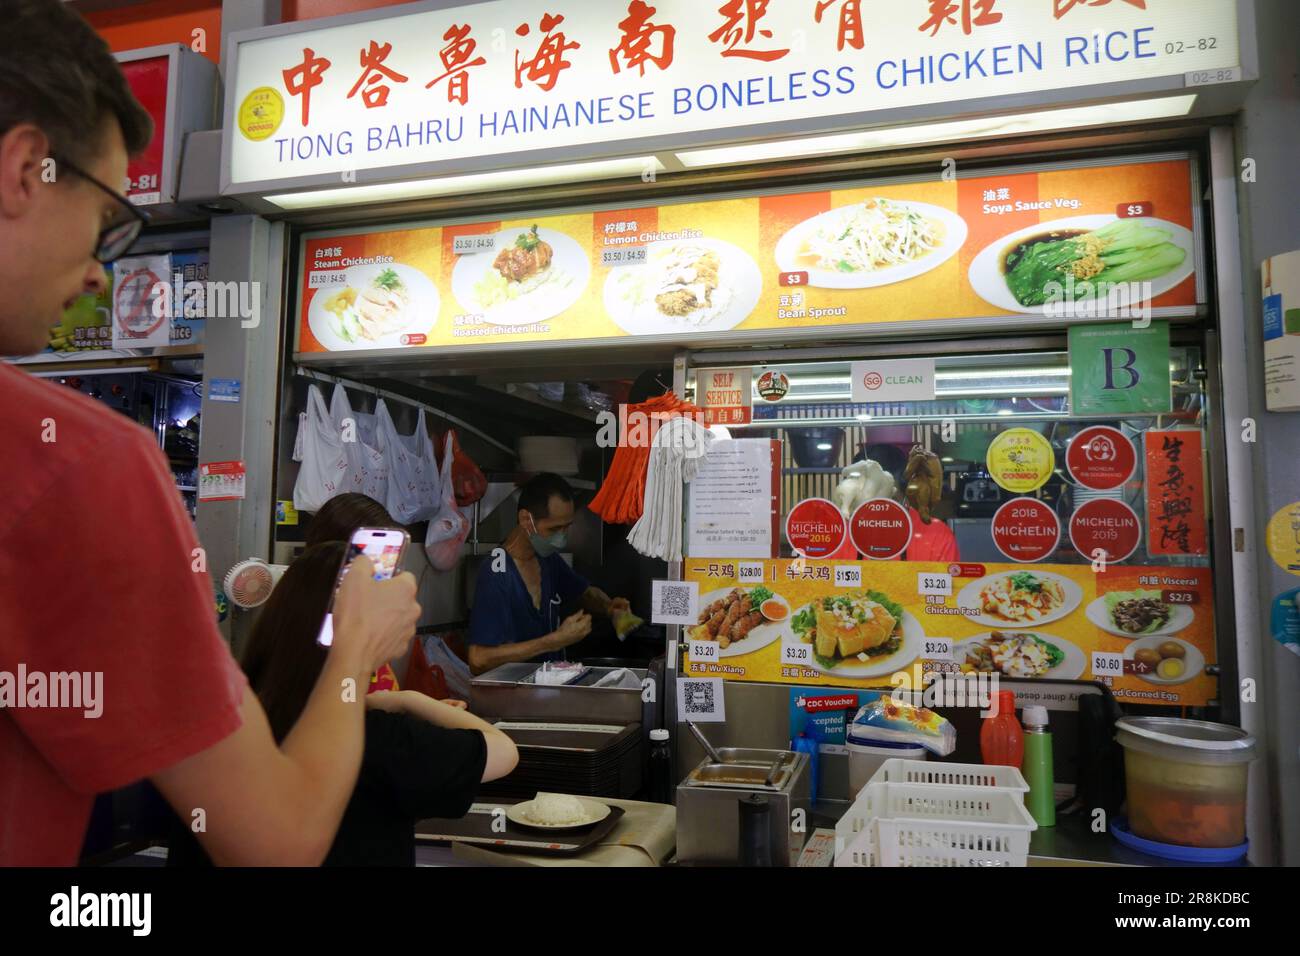 Tiong Bahru Hainanese Boneless Chicken Rice stall with Michelin Guide stickers, Tiong Bahru Hawker Food Centre, Singapore. No MR or PR Stock Photo